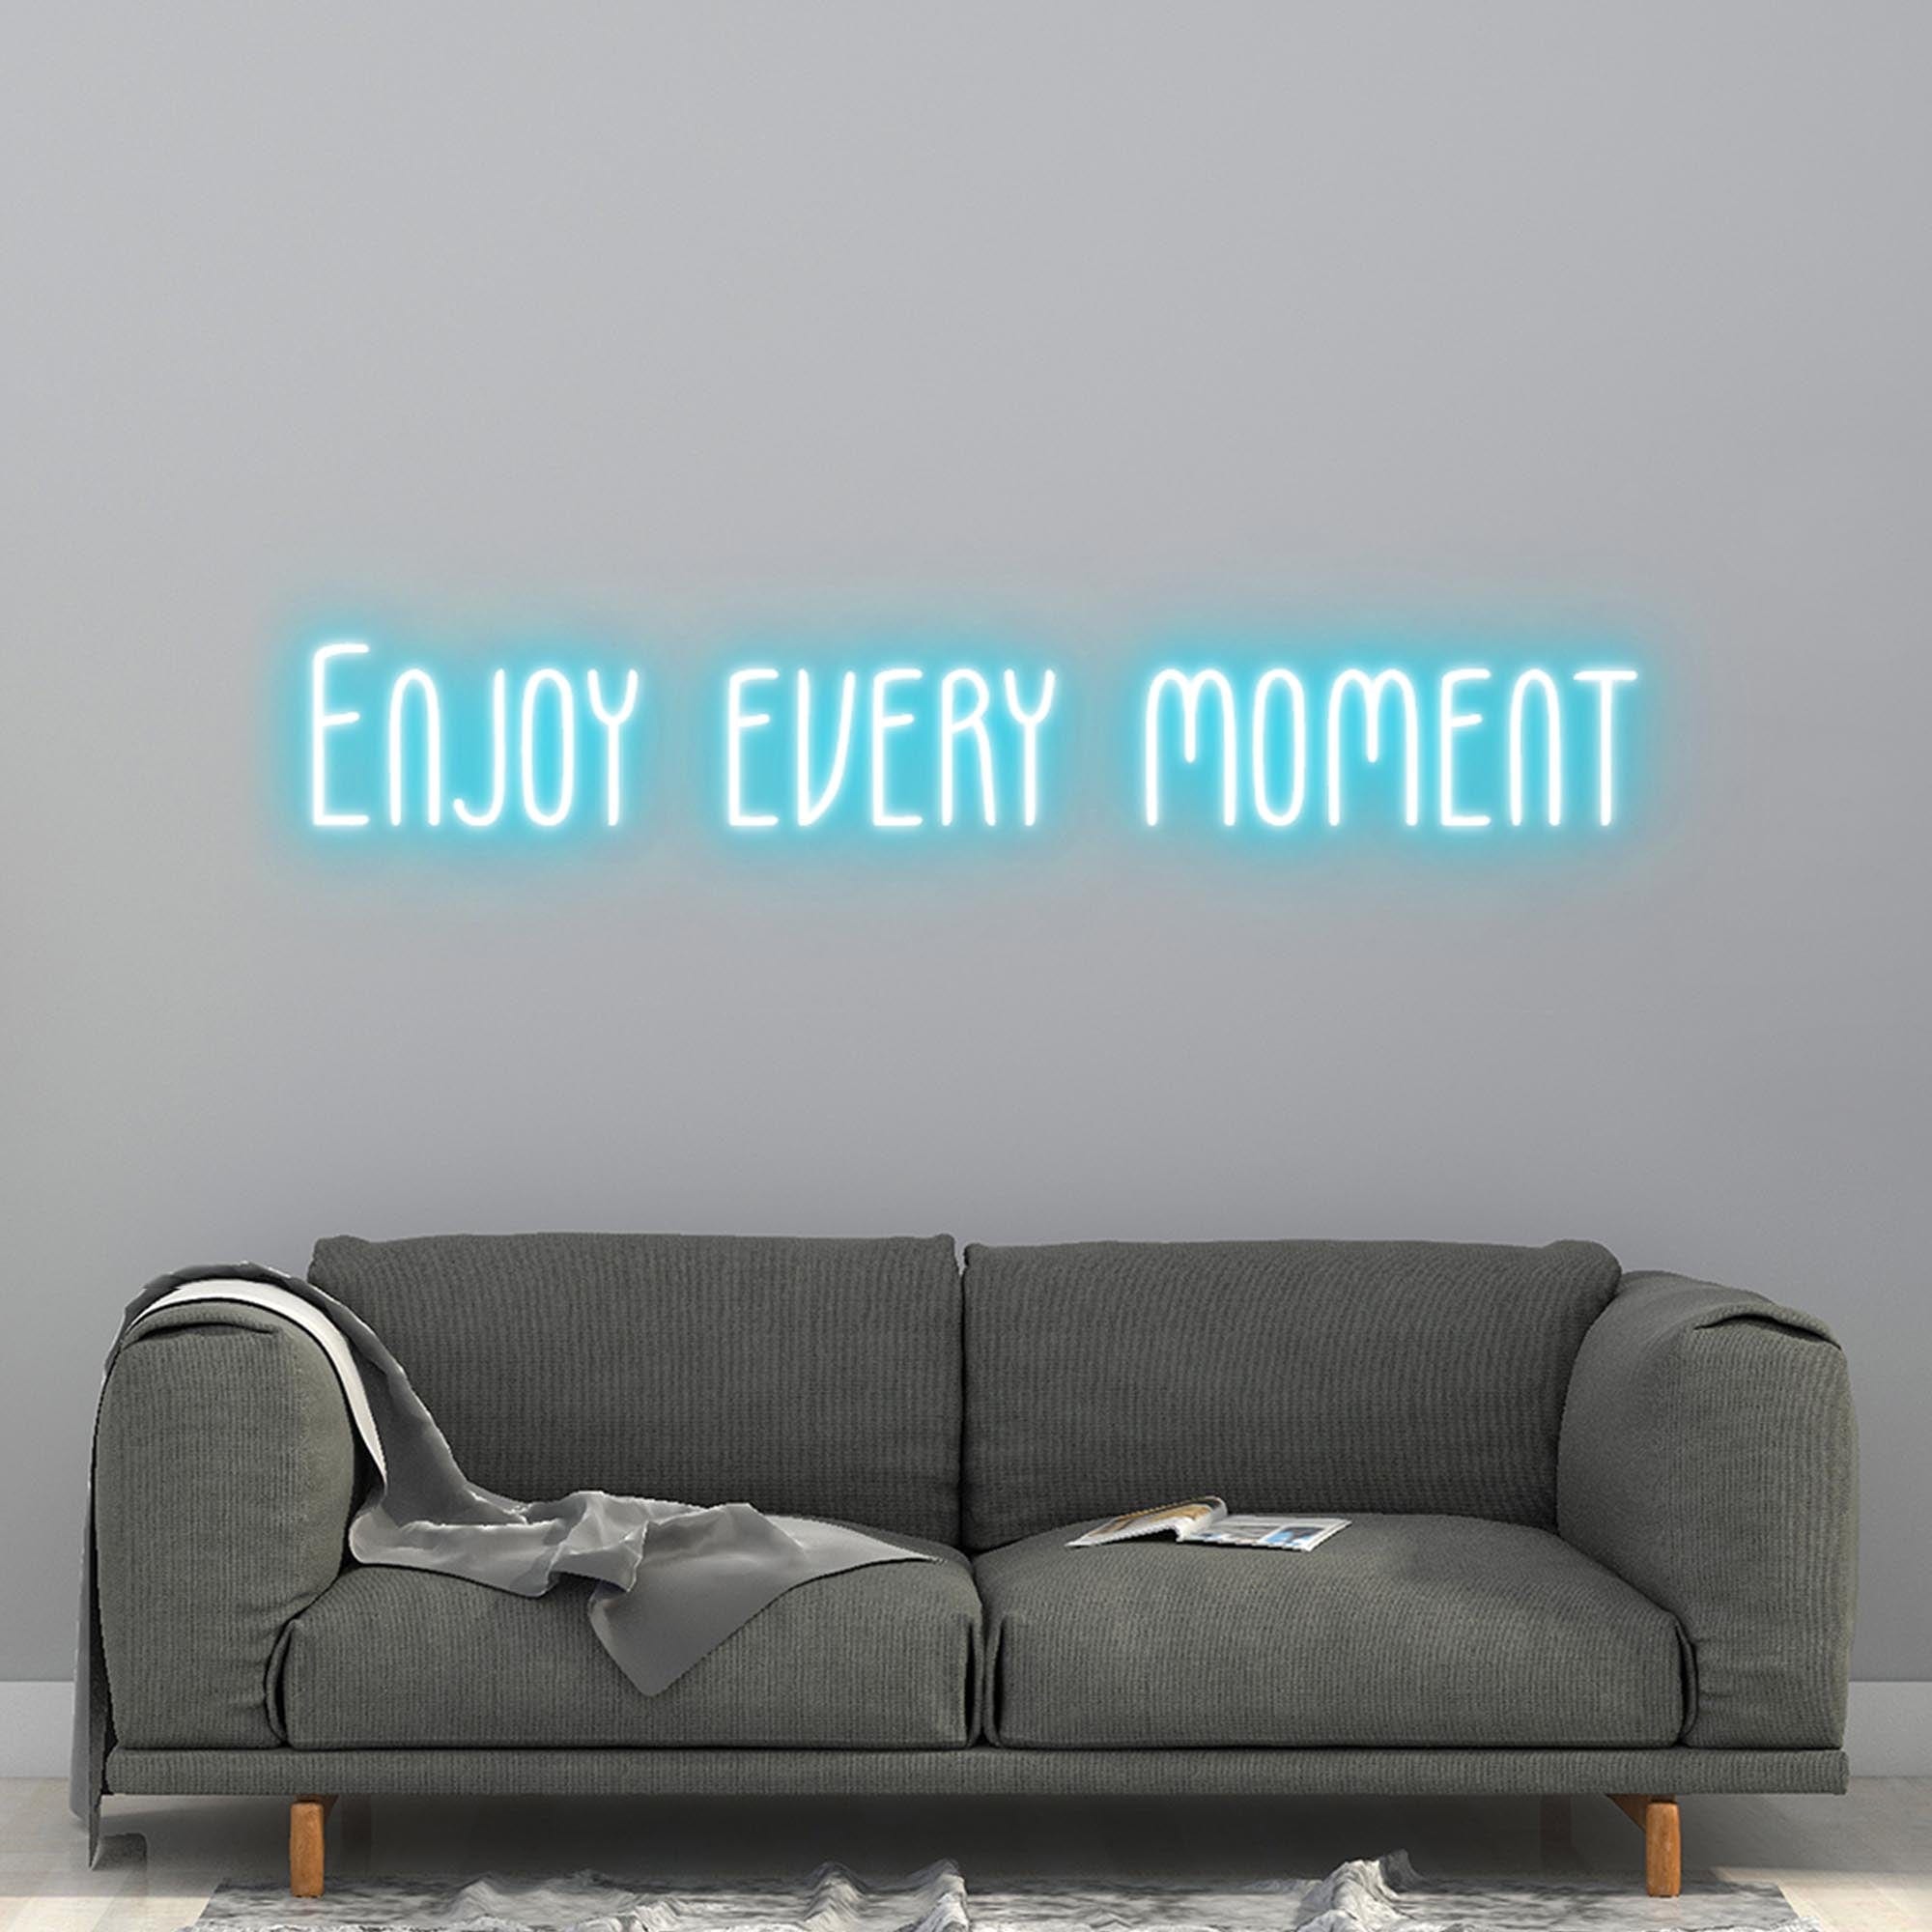 A Iceblue neon sign with the letters "enjoy every moment" is installed on the wall of the living room